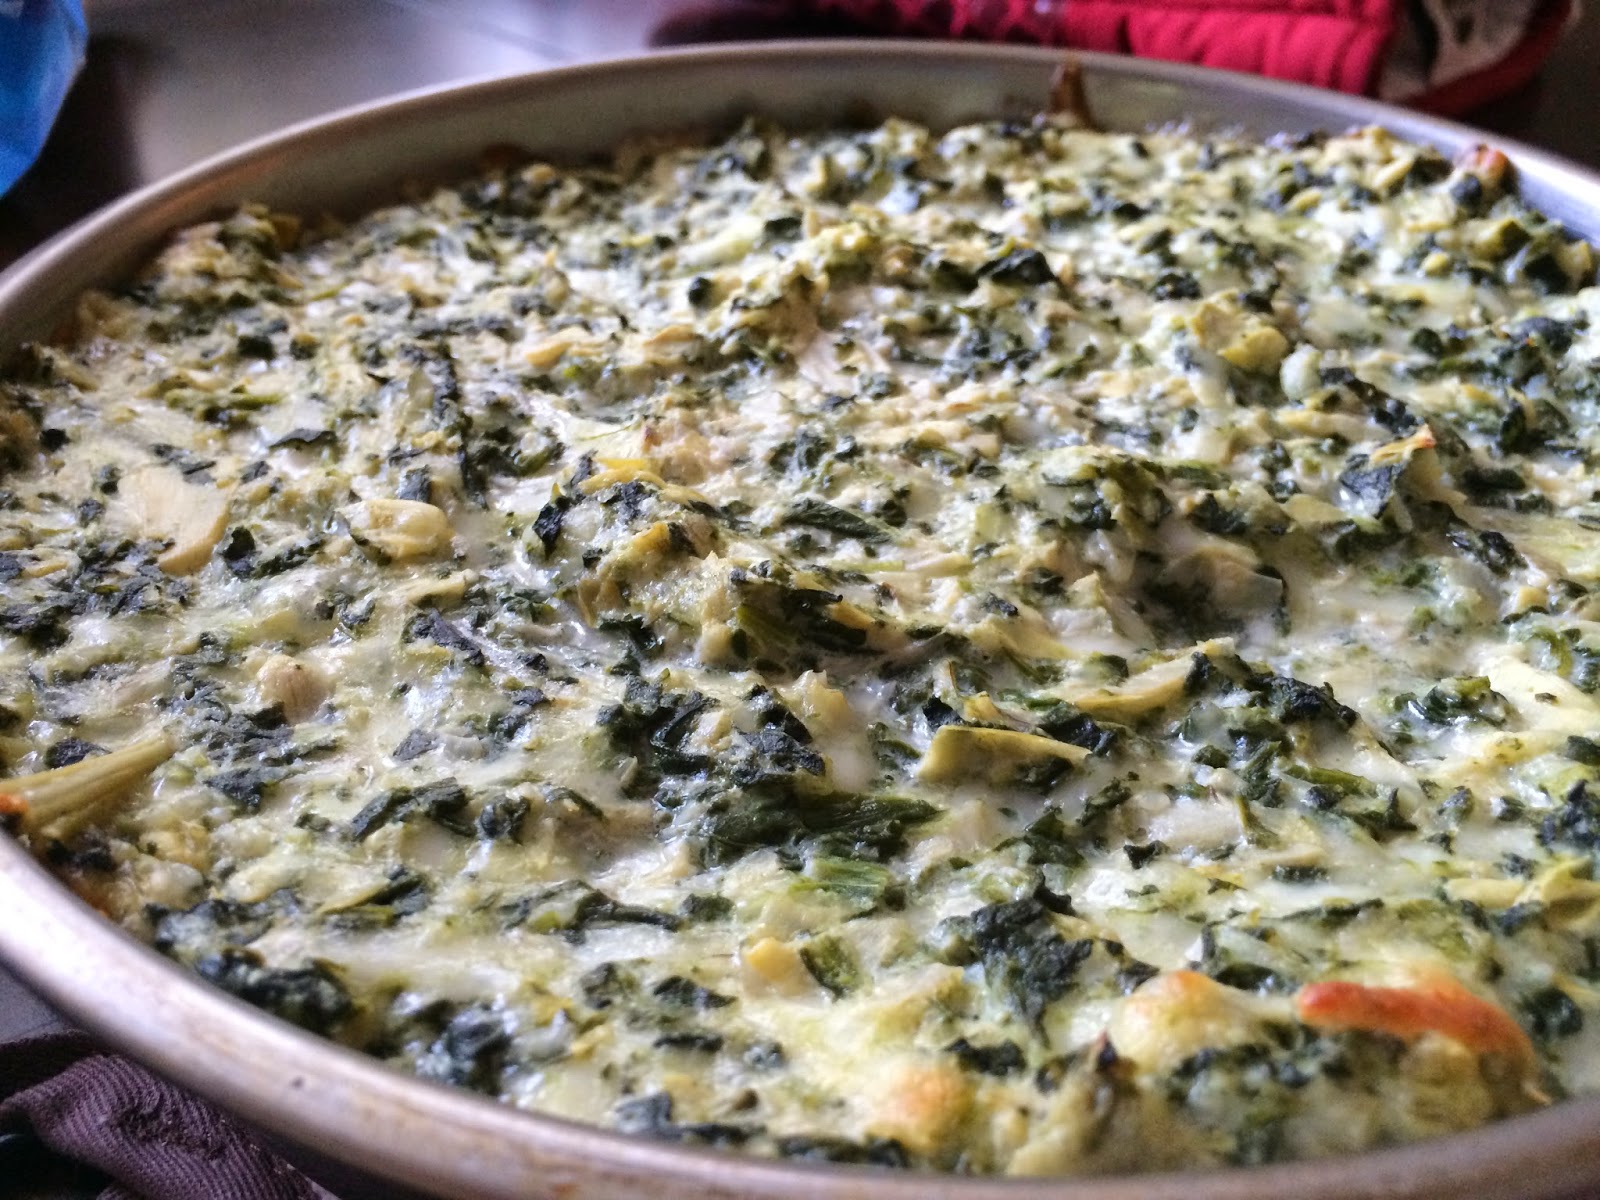 The Traveling Pipeliner's Wife: Lasagna and Spinach & Artichoke Dip